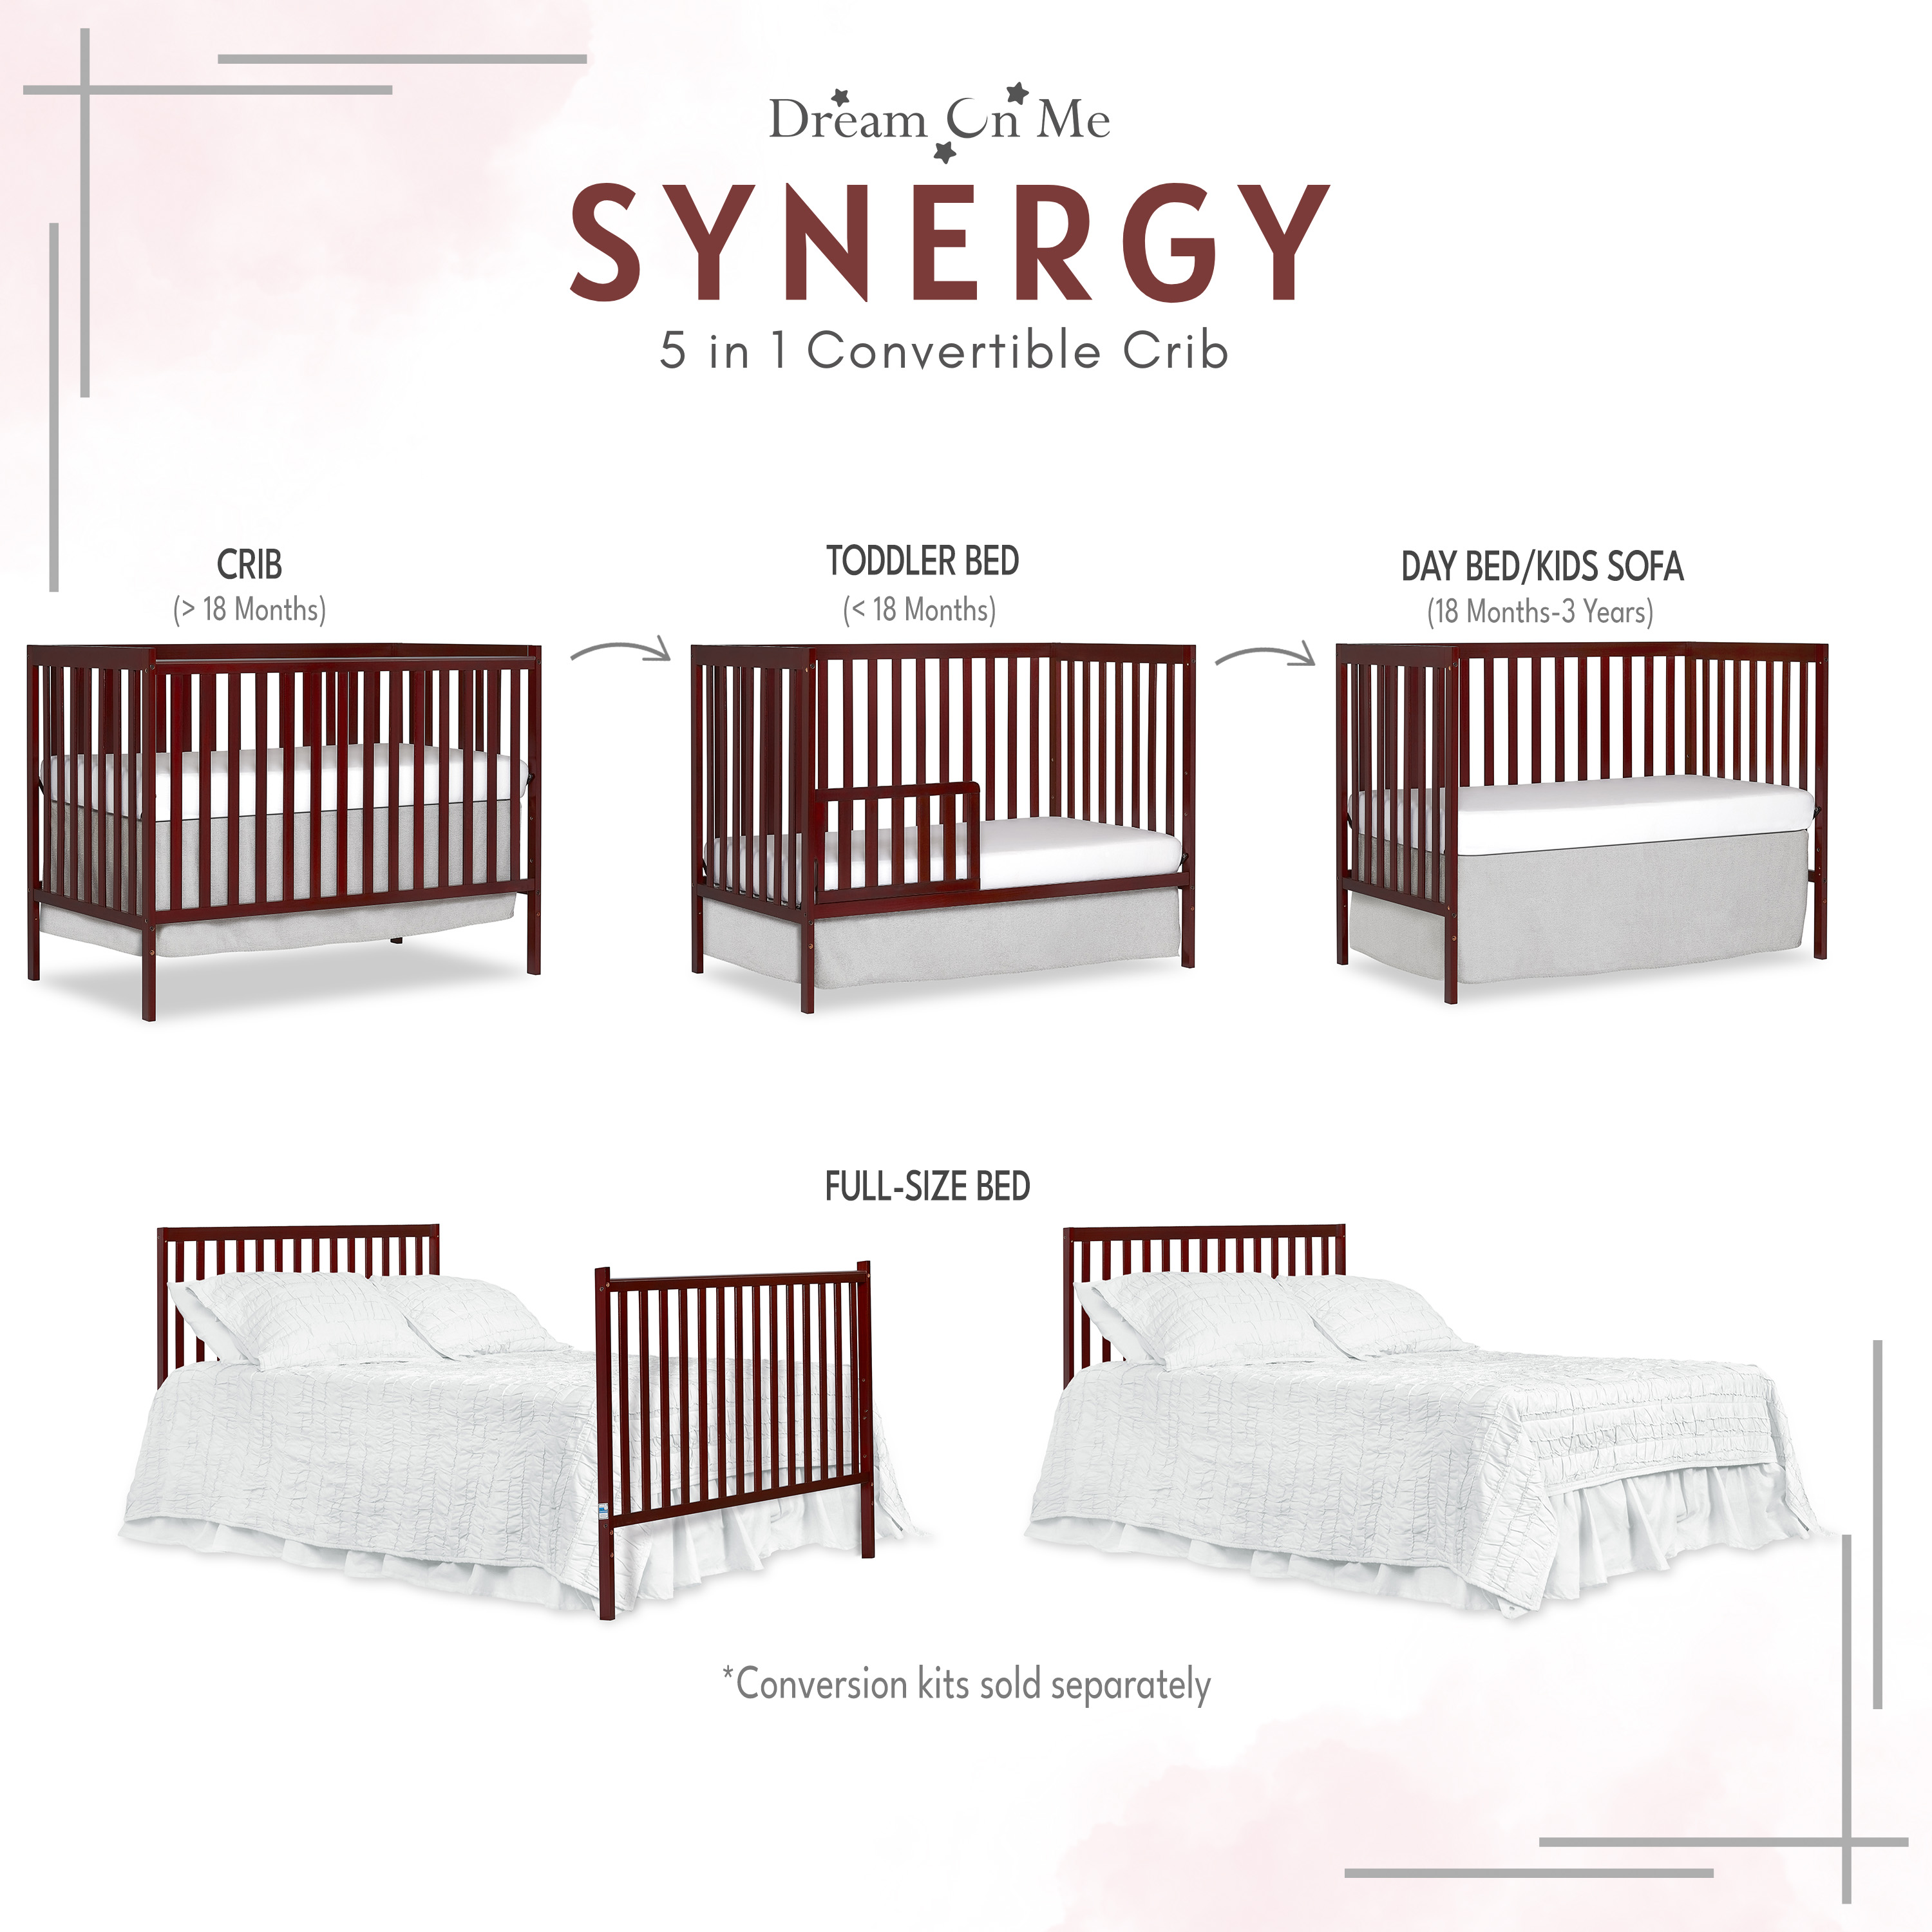 Dream On Me Synergy 5-in-1 Convertible Crib in Cherry, Greenguard Gold Certified - image 5 of 12